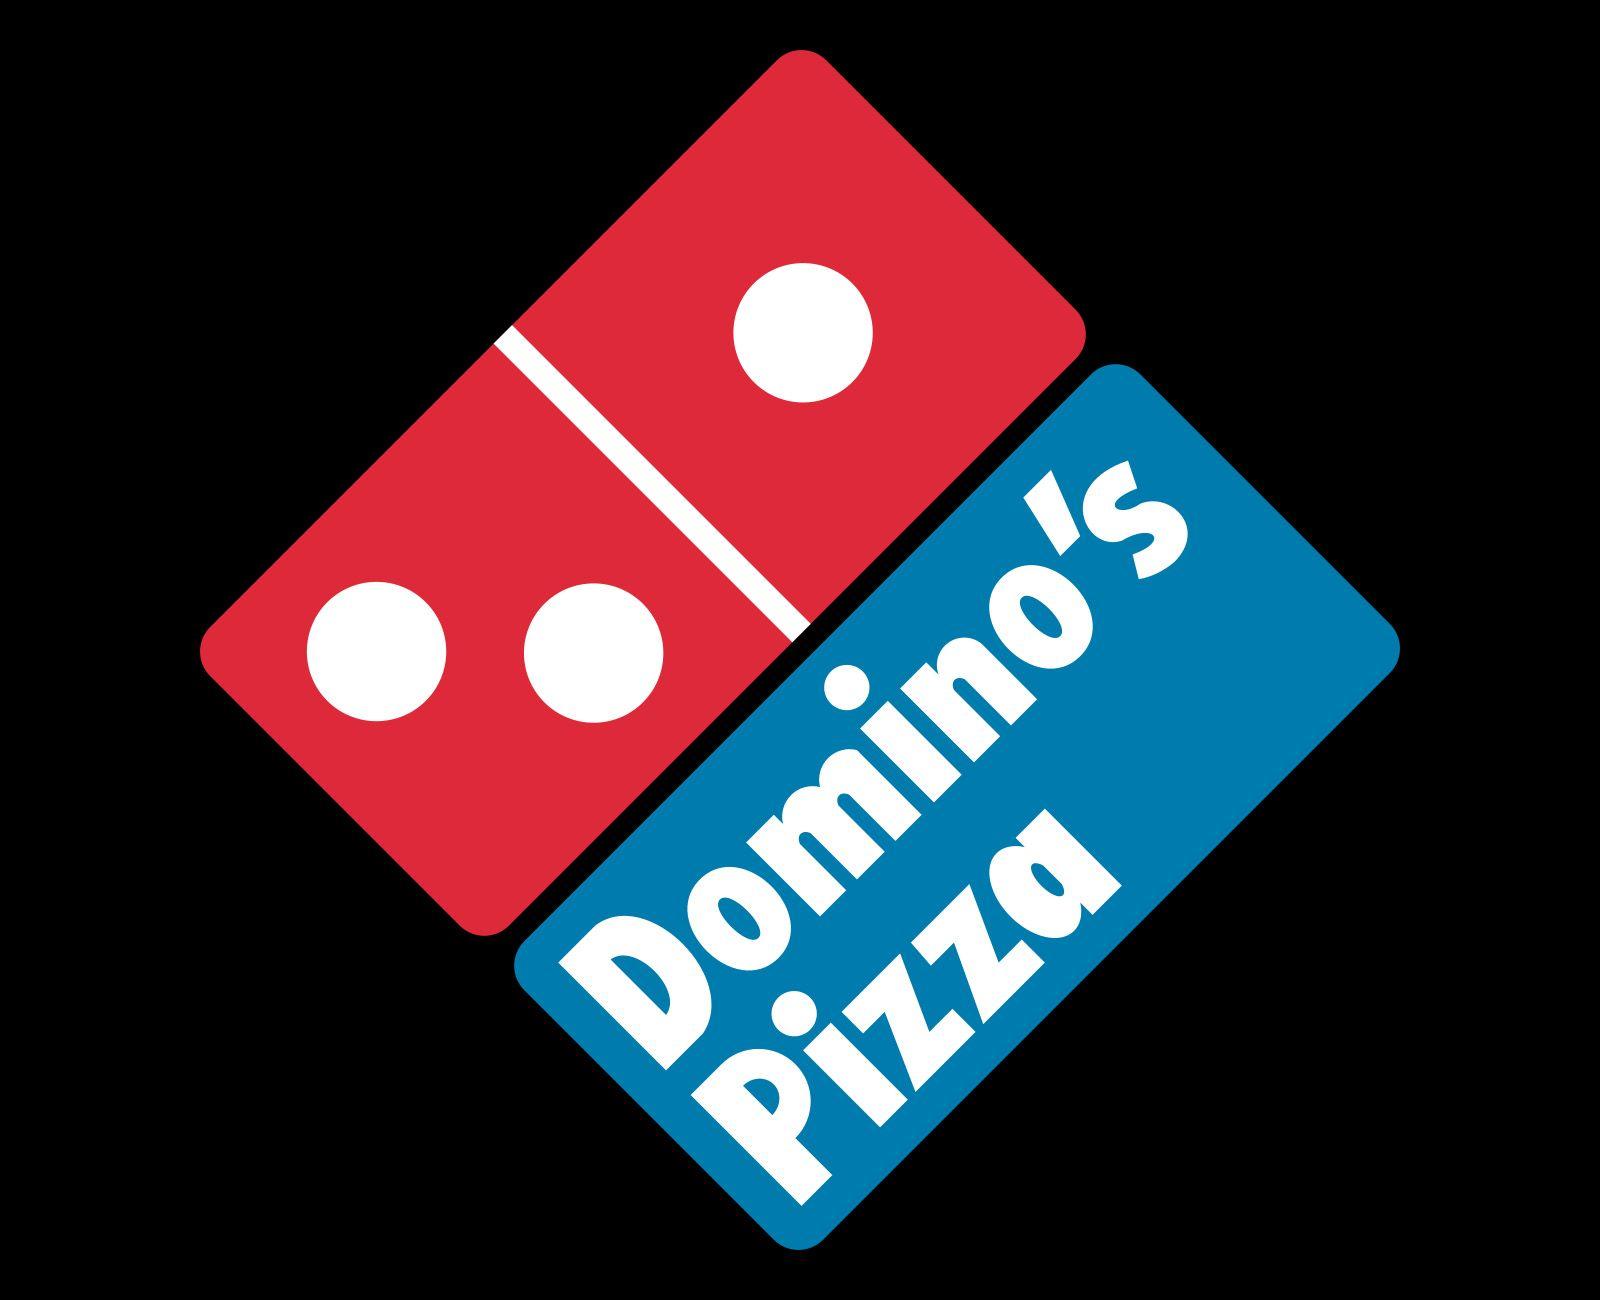 Red Domino Logo - Domino's Logo, Domino's Symbol, Meaning, History and Evolution